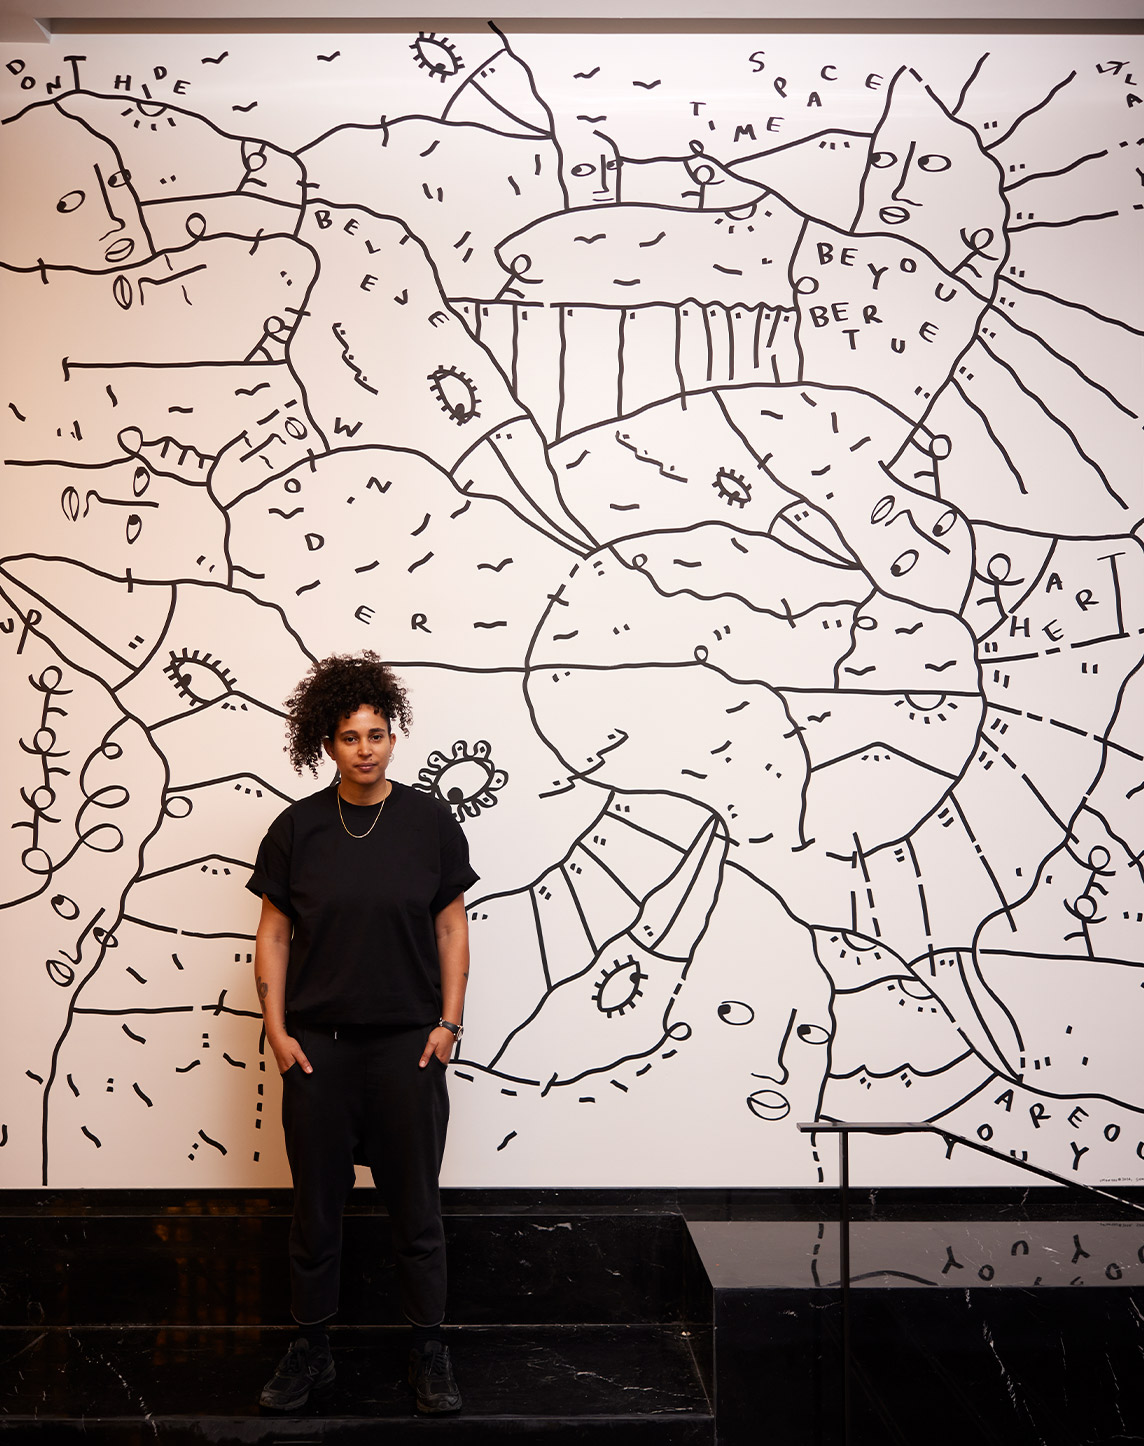 A young person with curly hair standing in front of a large, black and white abstract mural filled with various shapes and doodles. the individual wears a black outfit and poses confidently.